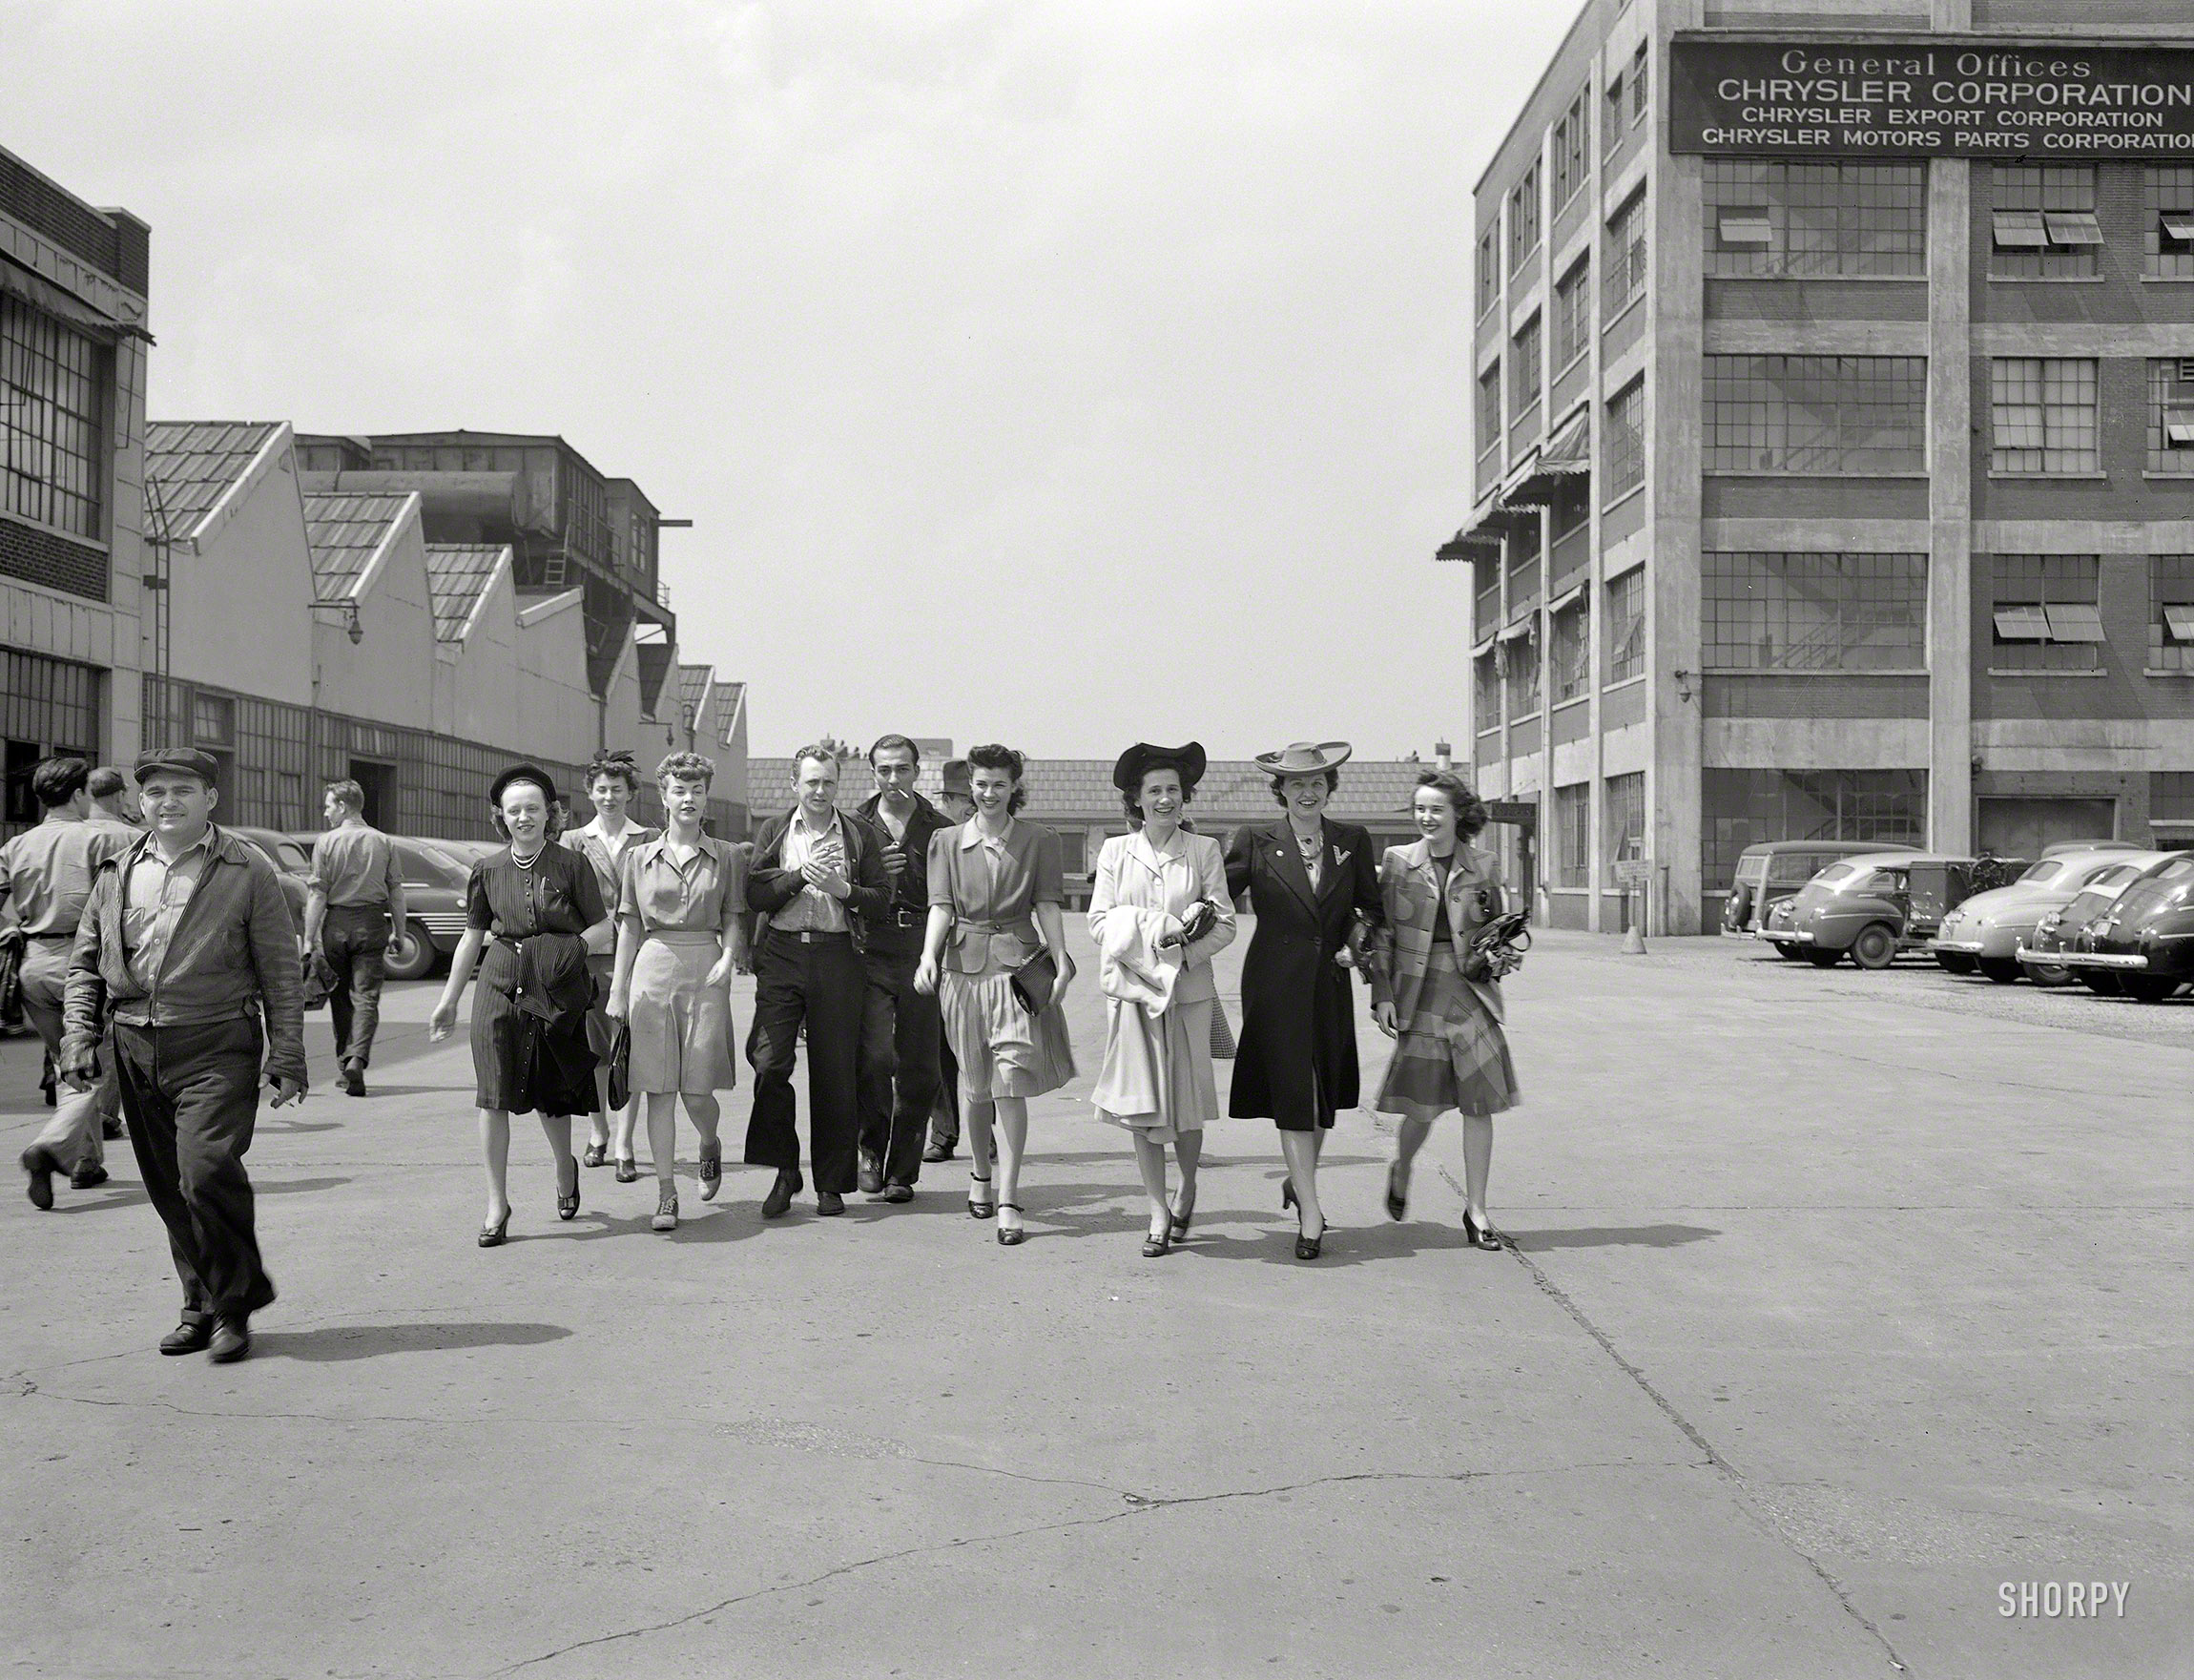 Spring 1942. "Detroit, Michigan. Girls coming out of the Highland Park Chrysler plant." Photo by Arthur Siegel for the Office of War Information. View full size.